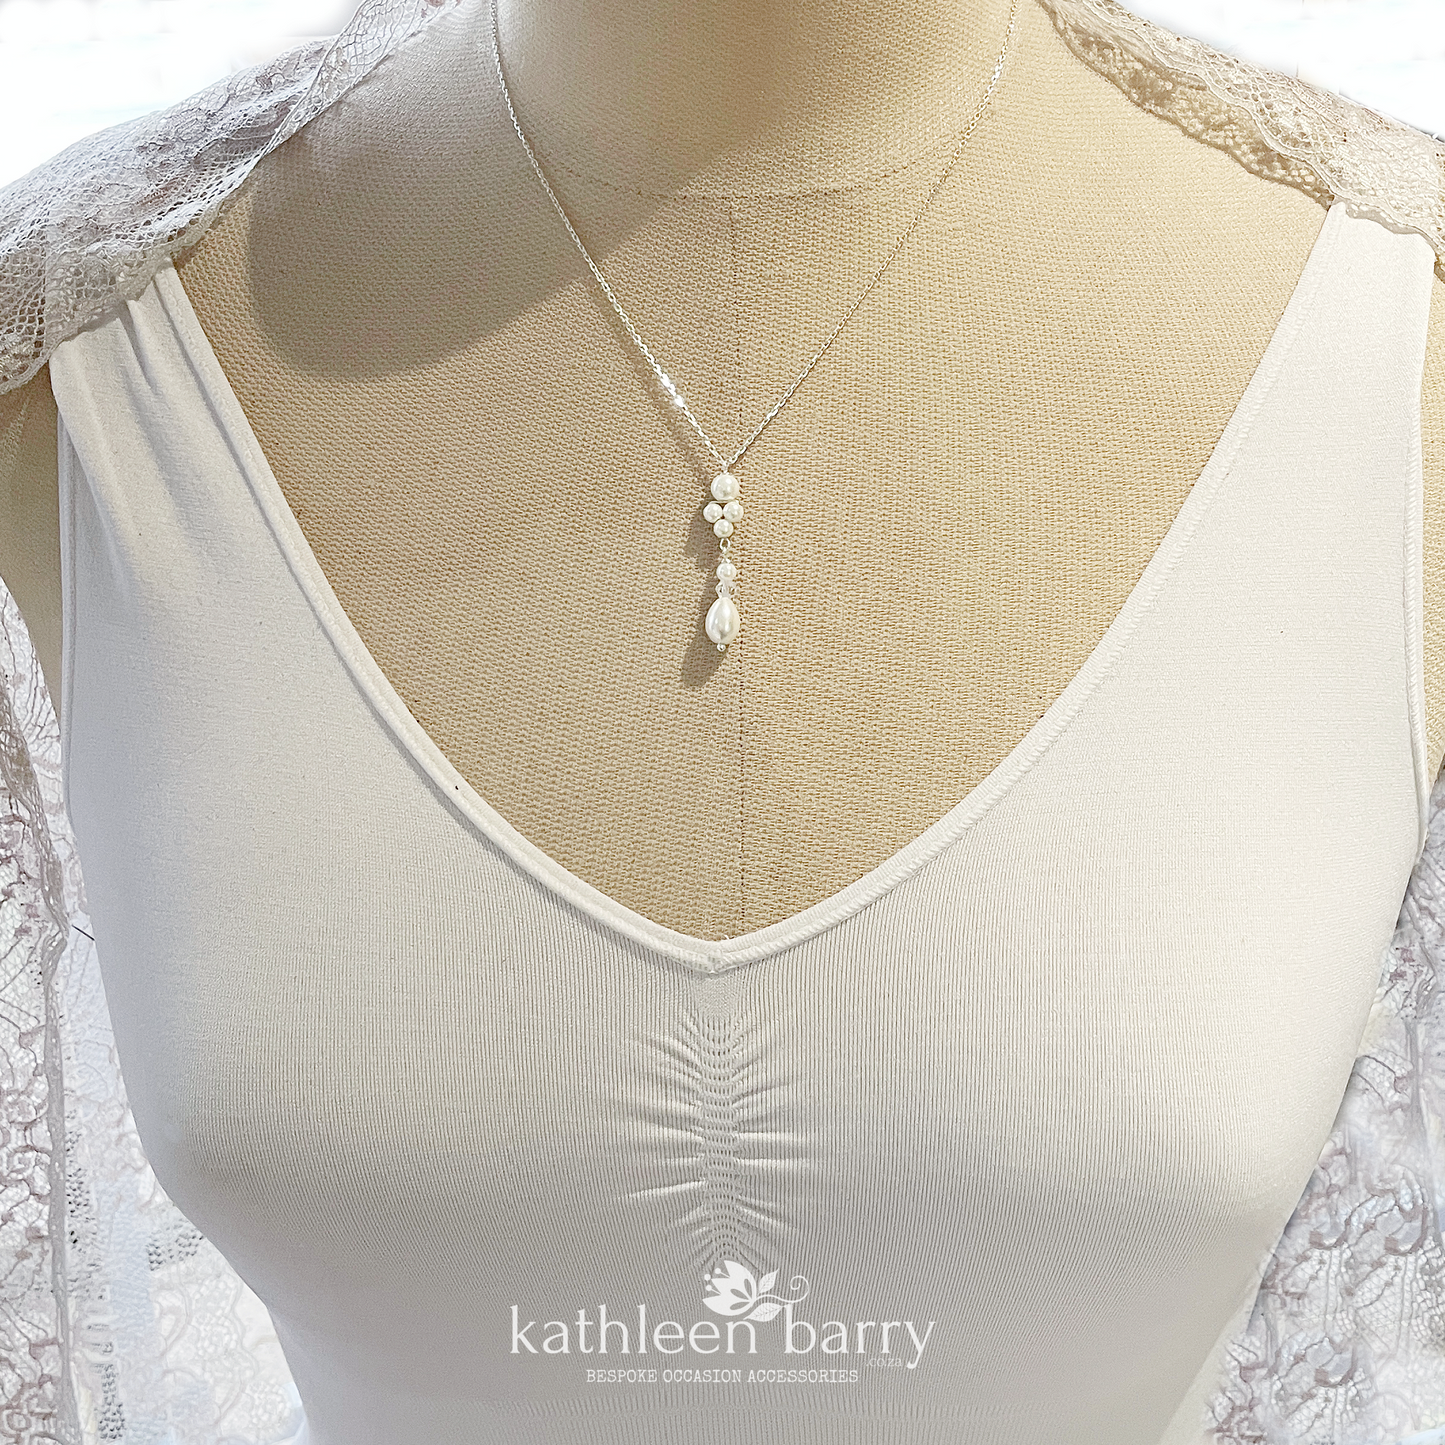 Lauren pearl pendant necklace available in Silver, gold or rose gold